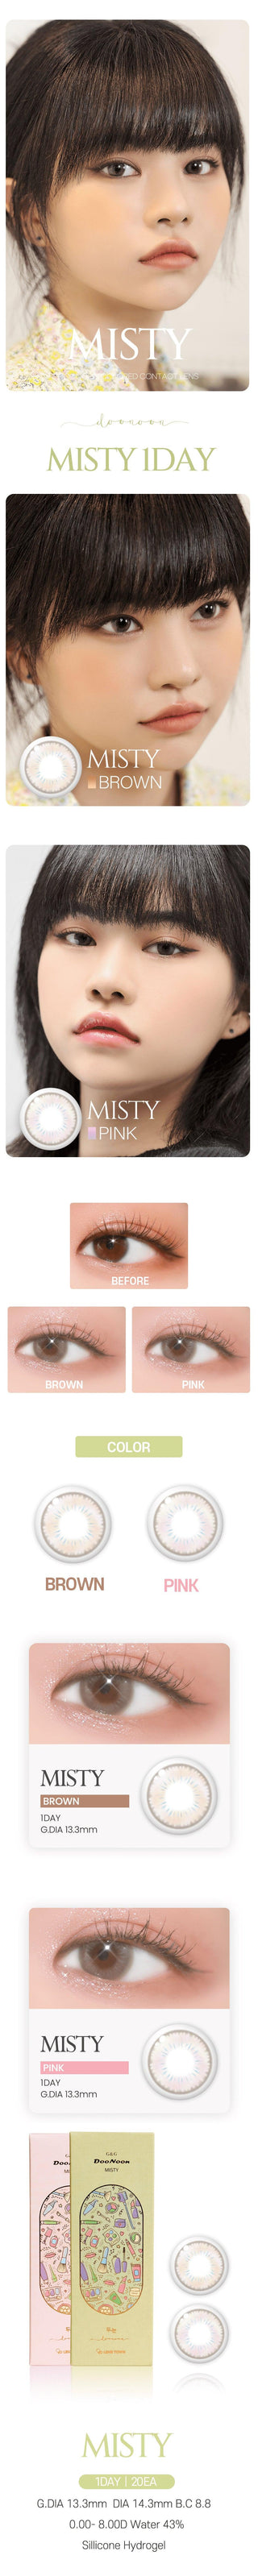 Variety of DooNoon Misty Brown (20pk) contact lens colors displayed, with closeups of an eye wearing the contact lens colors, and with a model wearing the contact lens colors showing realistic eye-enlarging effect from various angles.